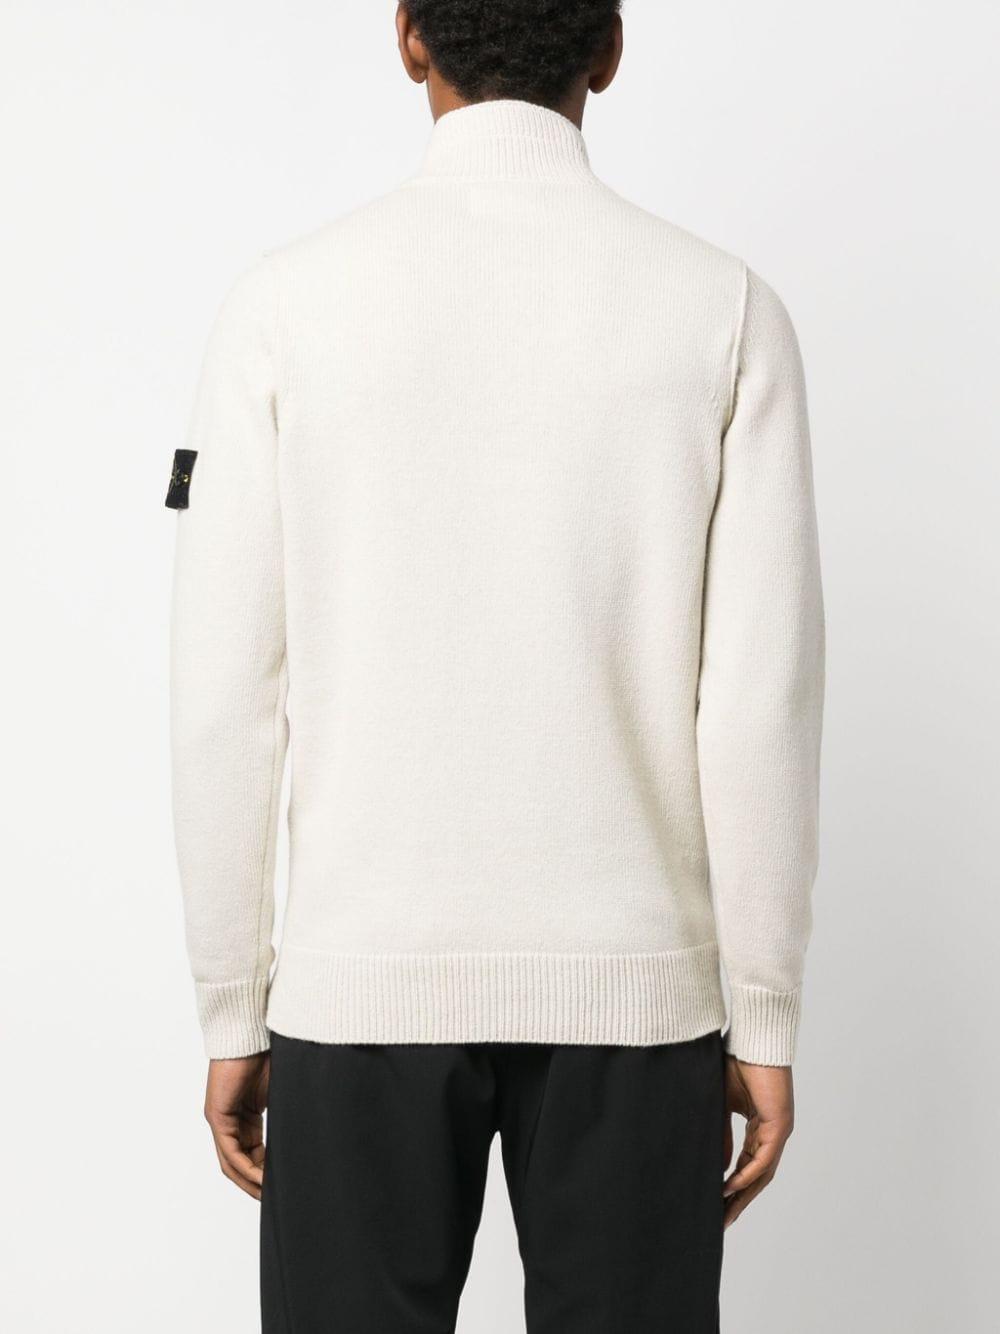 Stone Island Compass-patch High-neck Jumper in White for Men | Lyst